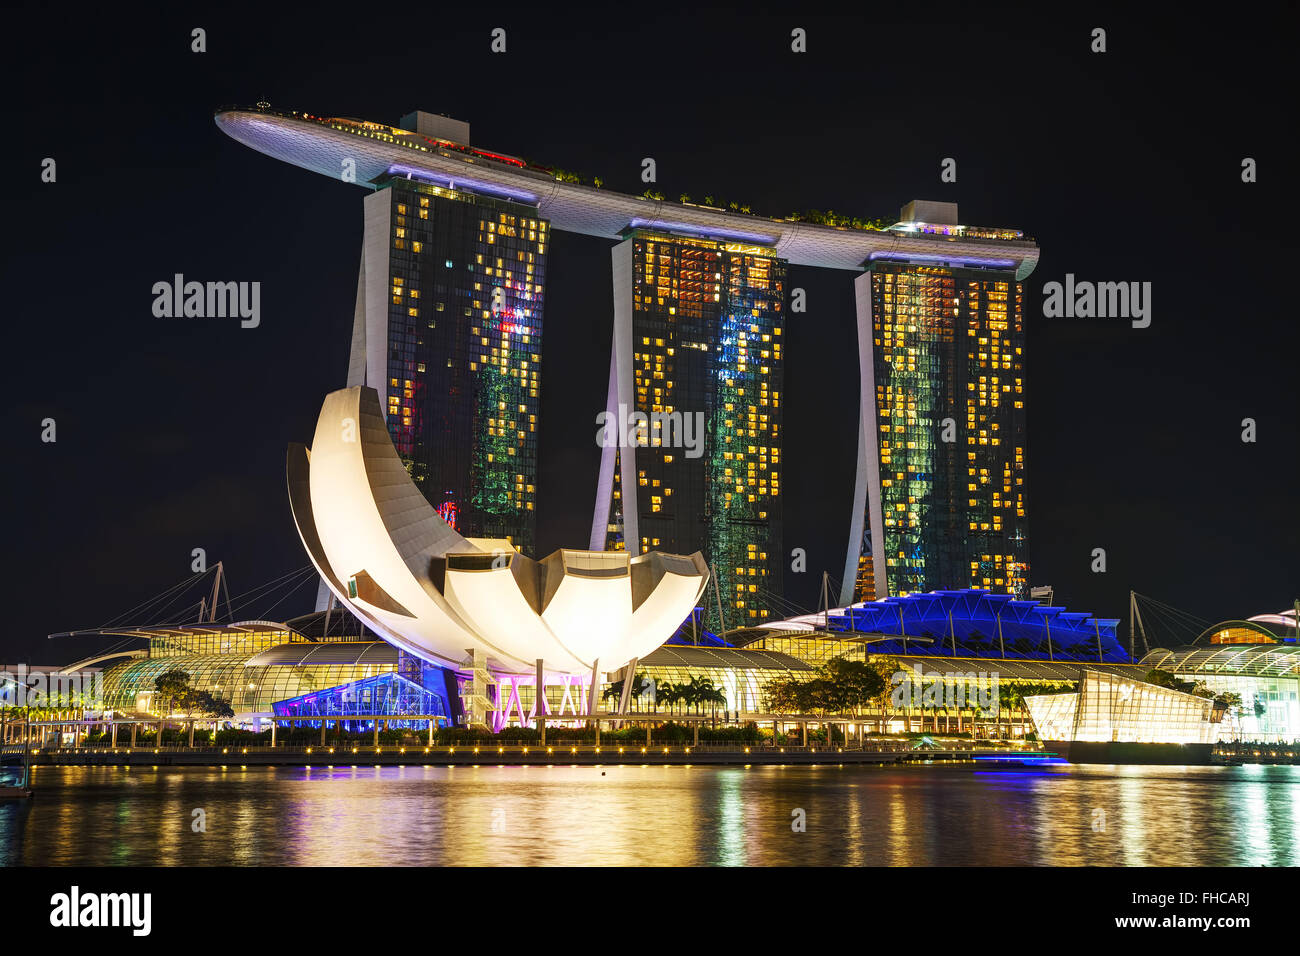 SINGAPORE - OCTOBER 30: Overview of the marina bay with Marina Bay Sands on October 30, 2015 in Singapore. Stock Photo